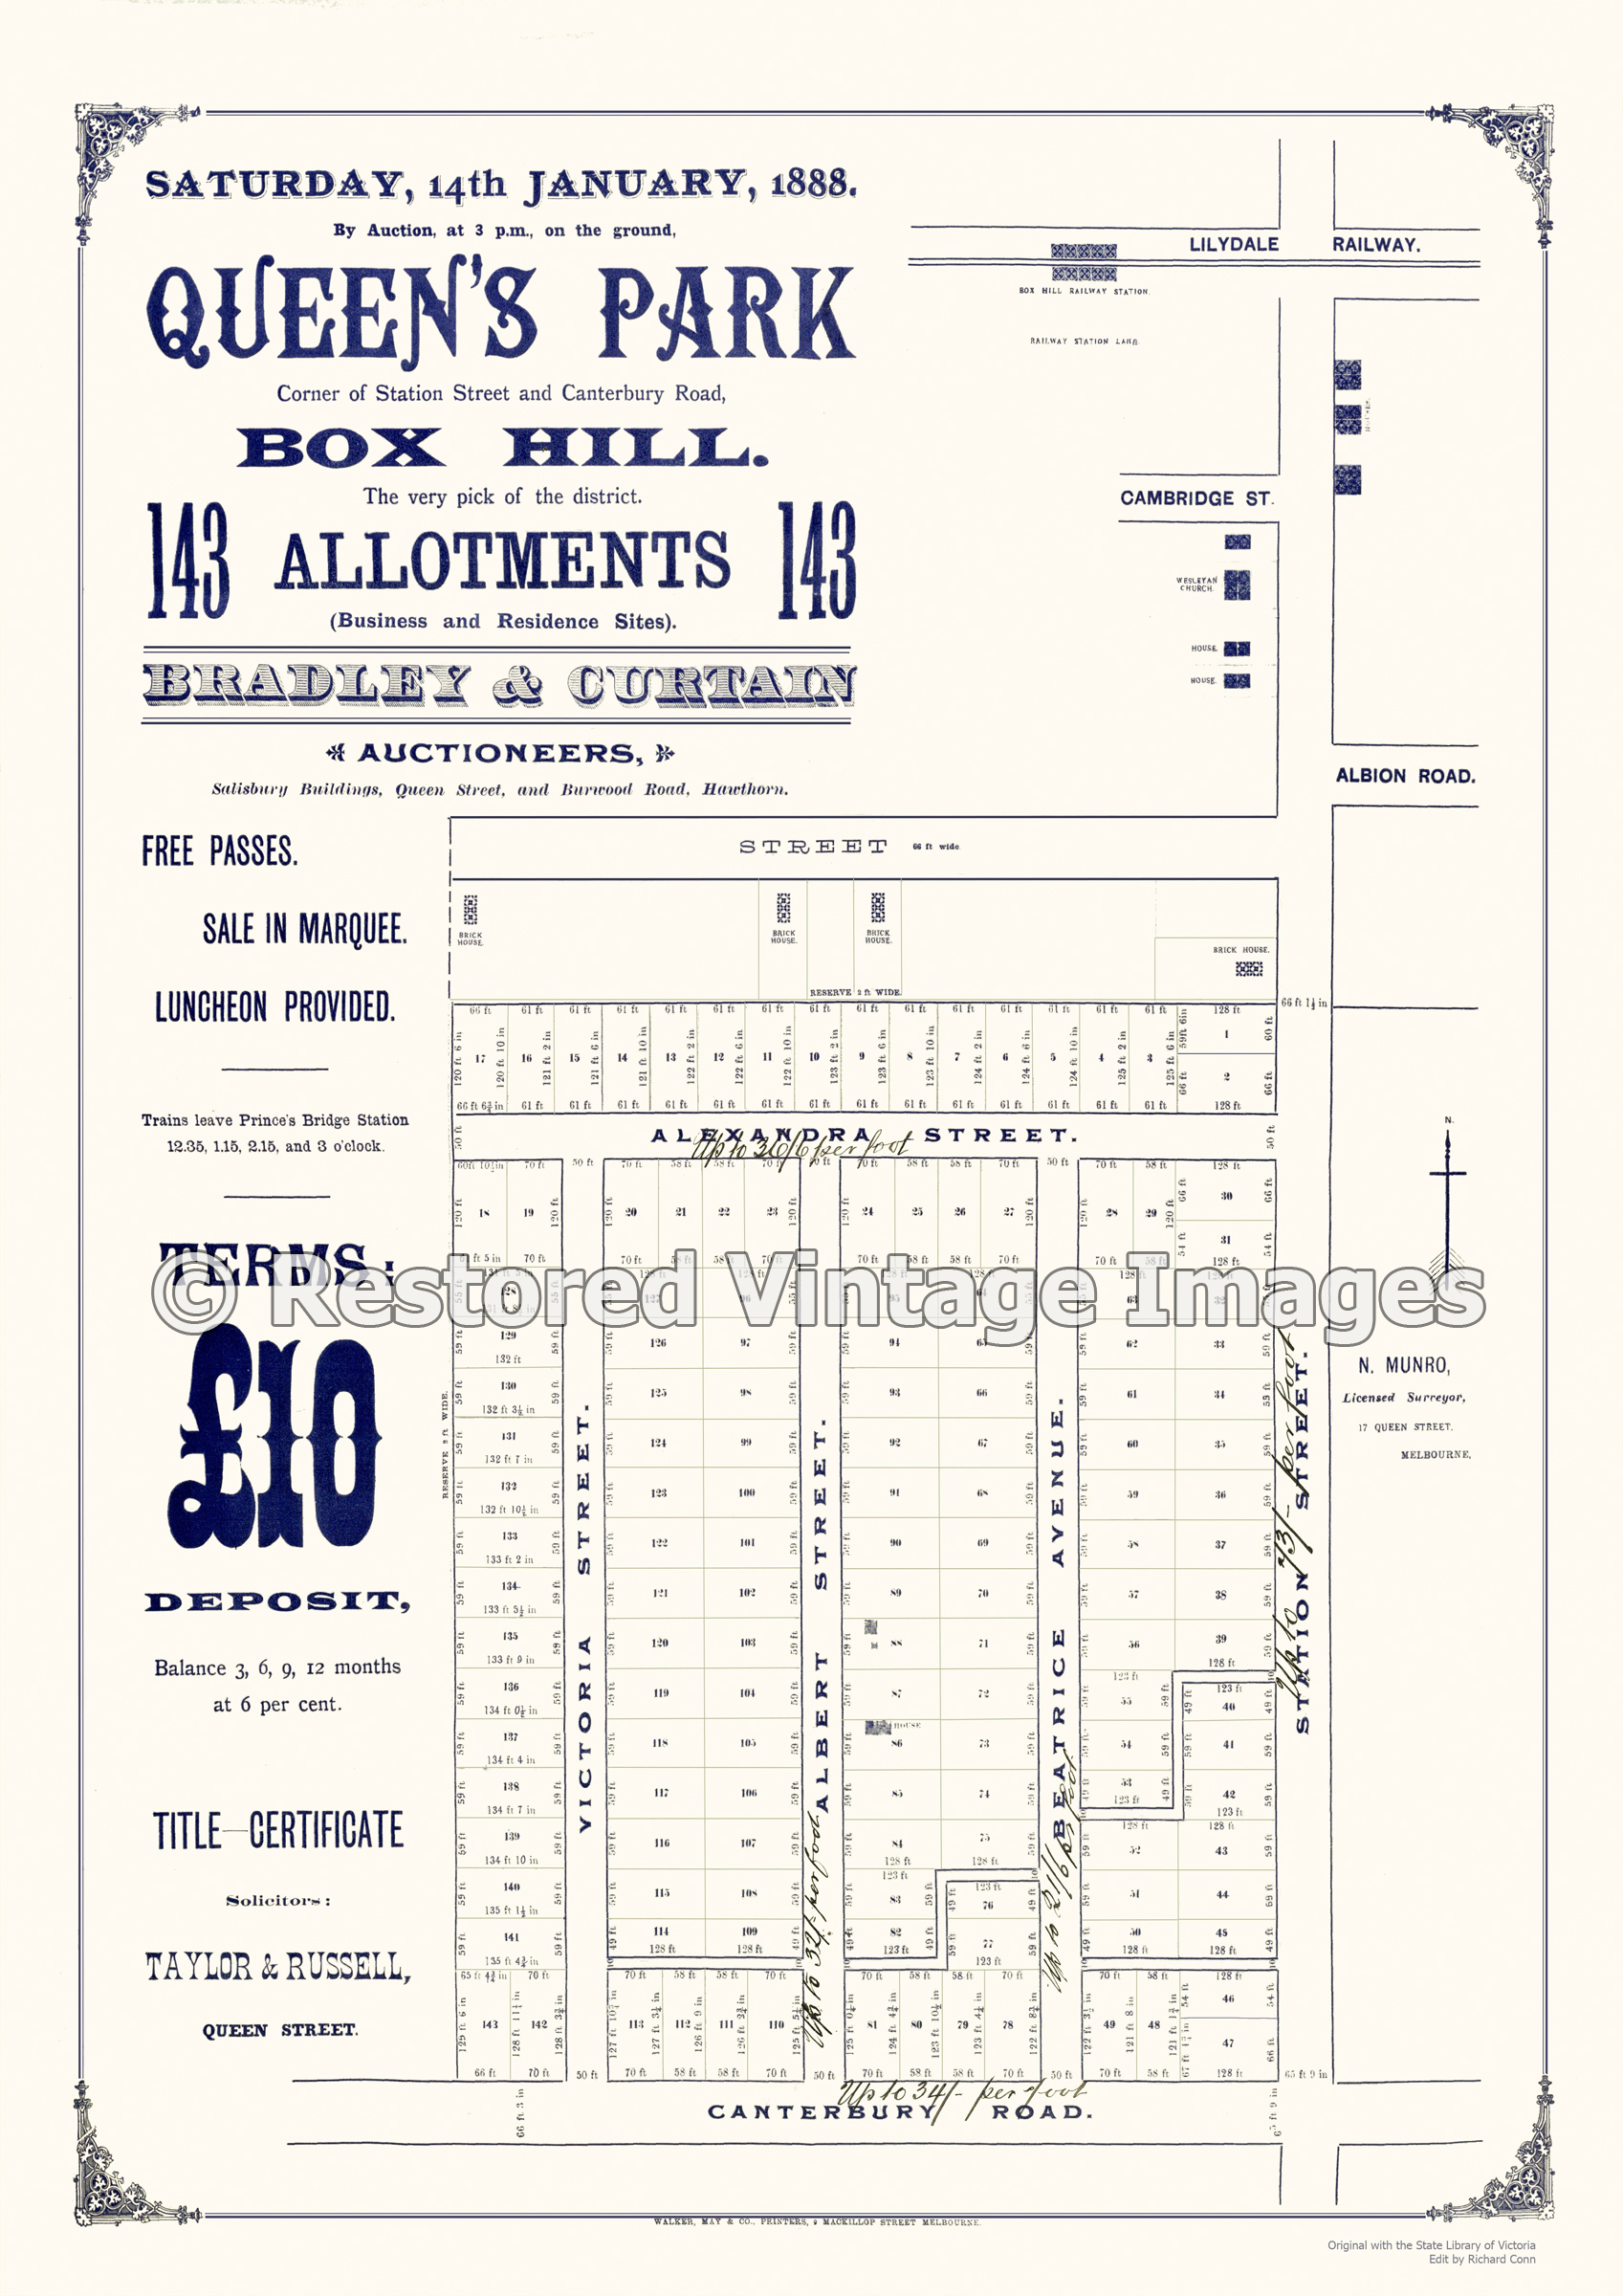 Queen’s Park Box Hill 14th January 1888 – Box Hill South